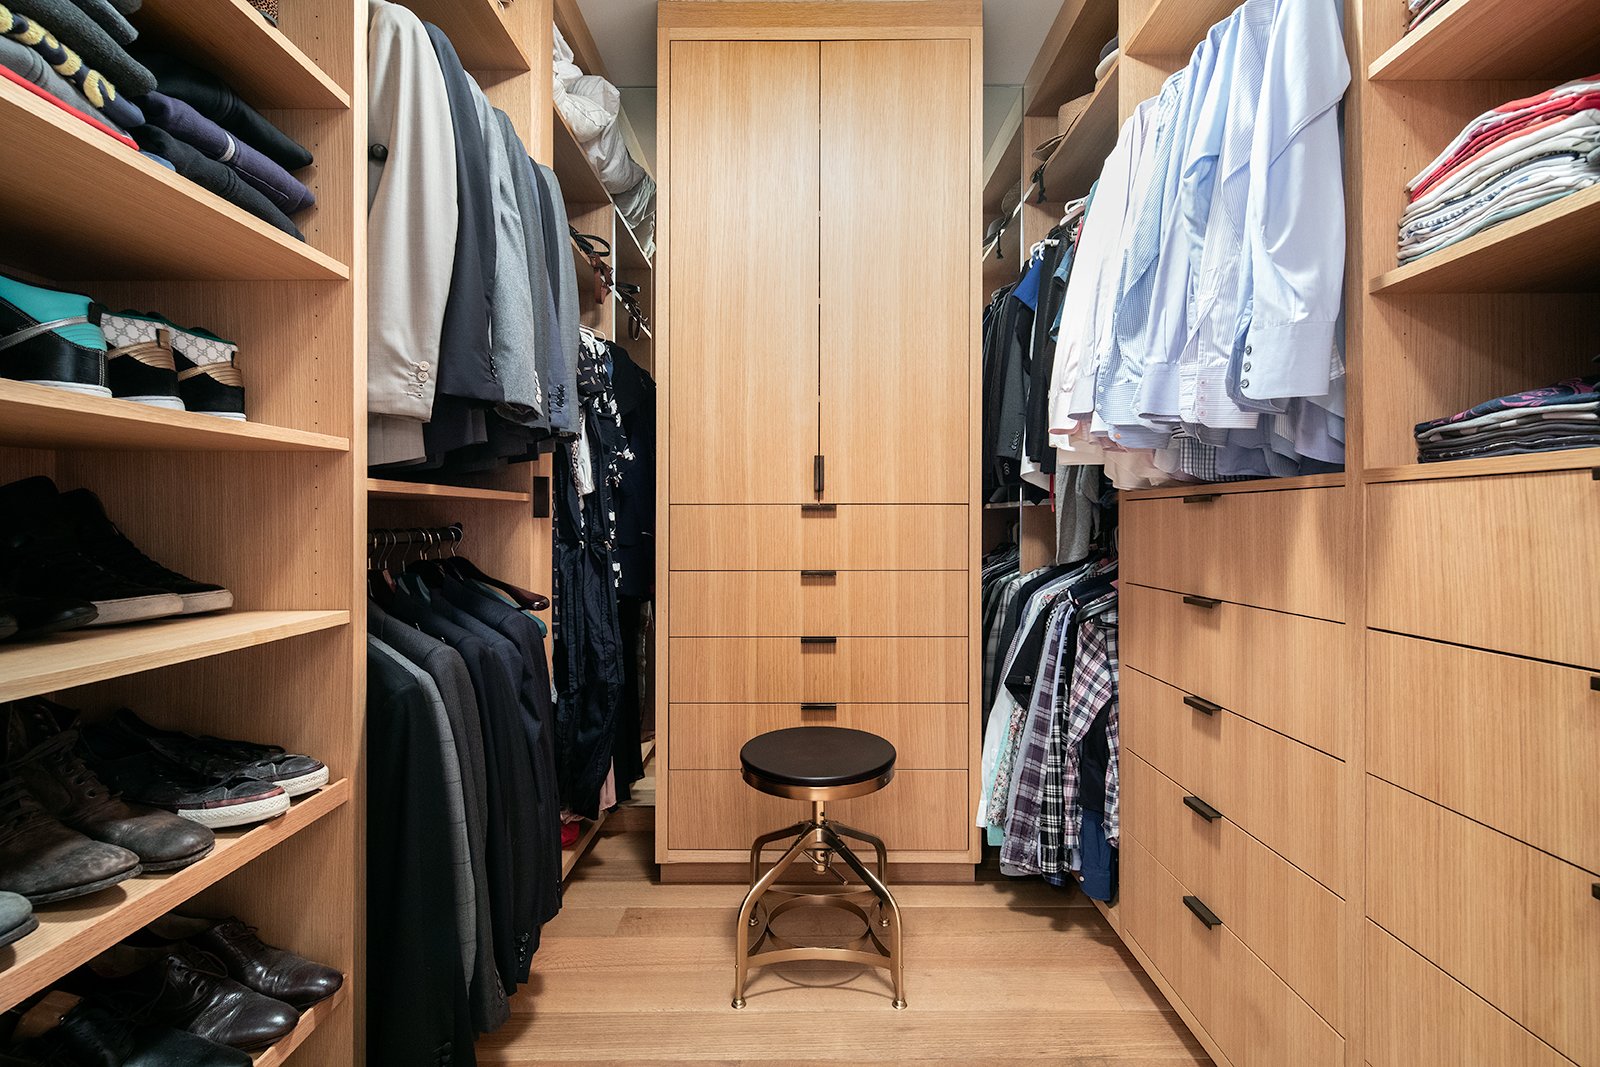 the-master-bedroom-also-includes-a-large-walk-in-closet-that-is-clad-in-the-same.jpg